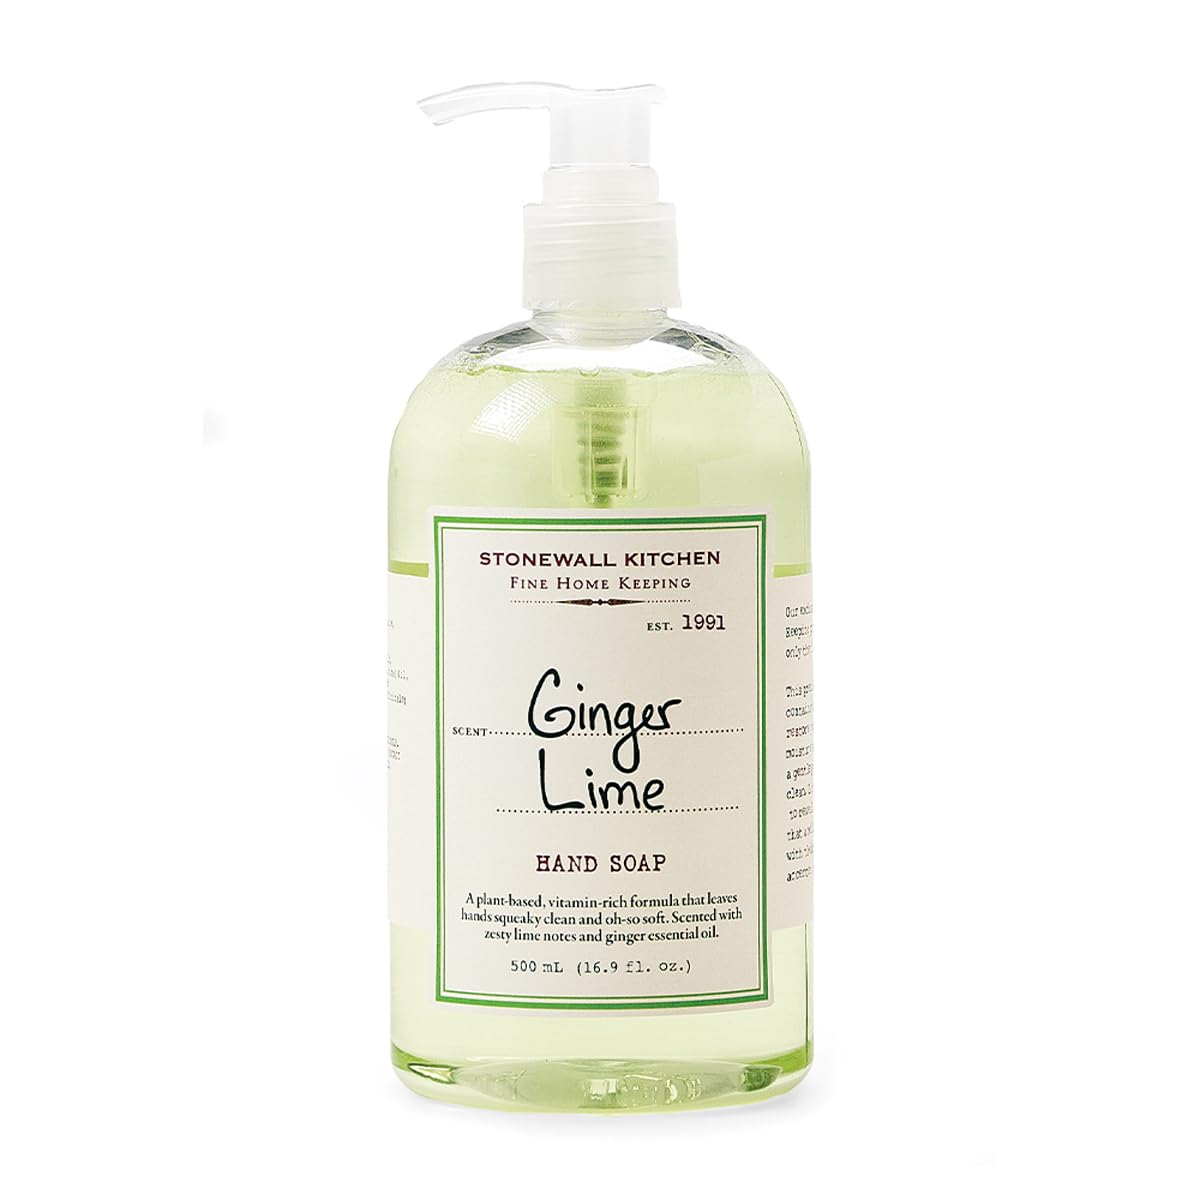 Stonewall Kitchen Ginger Lime Hand Soap, 16.9 oz